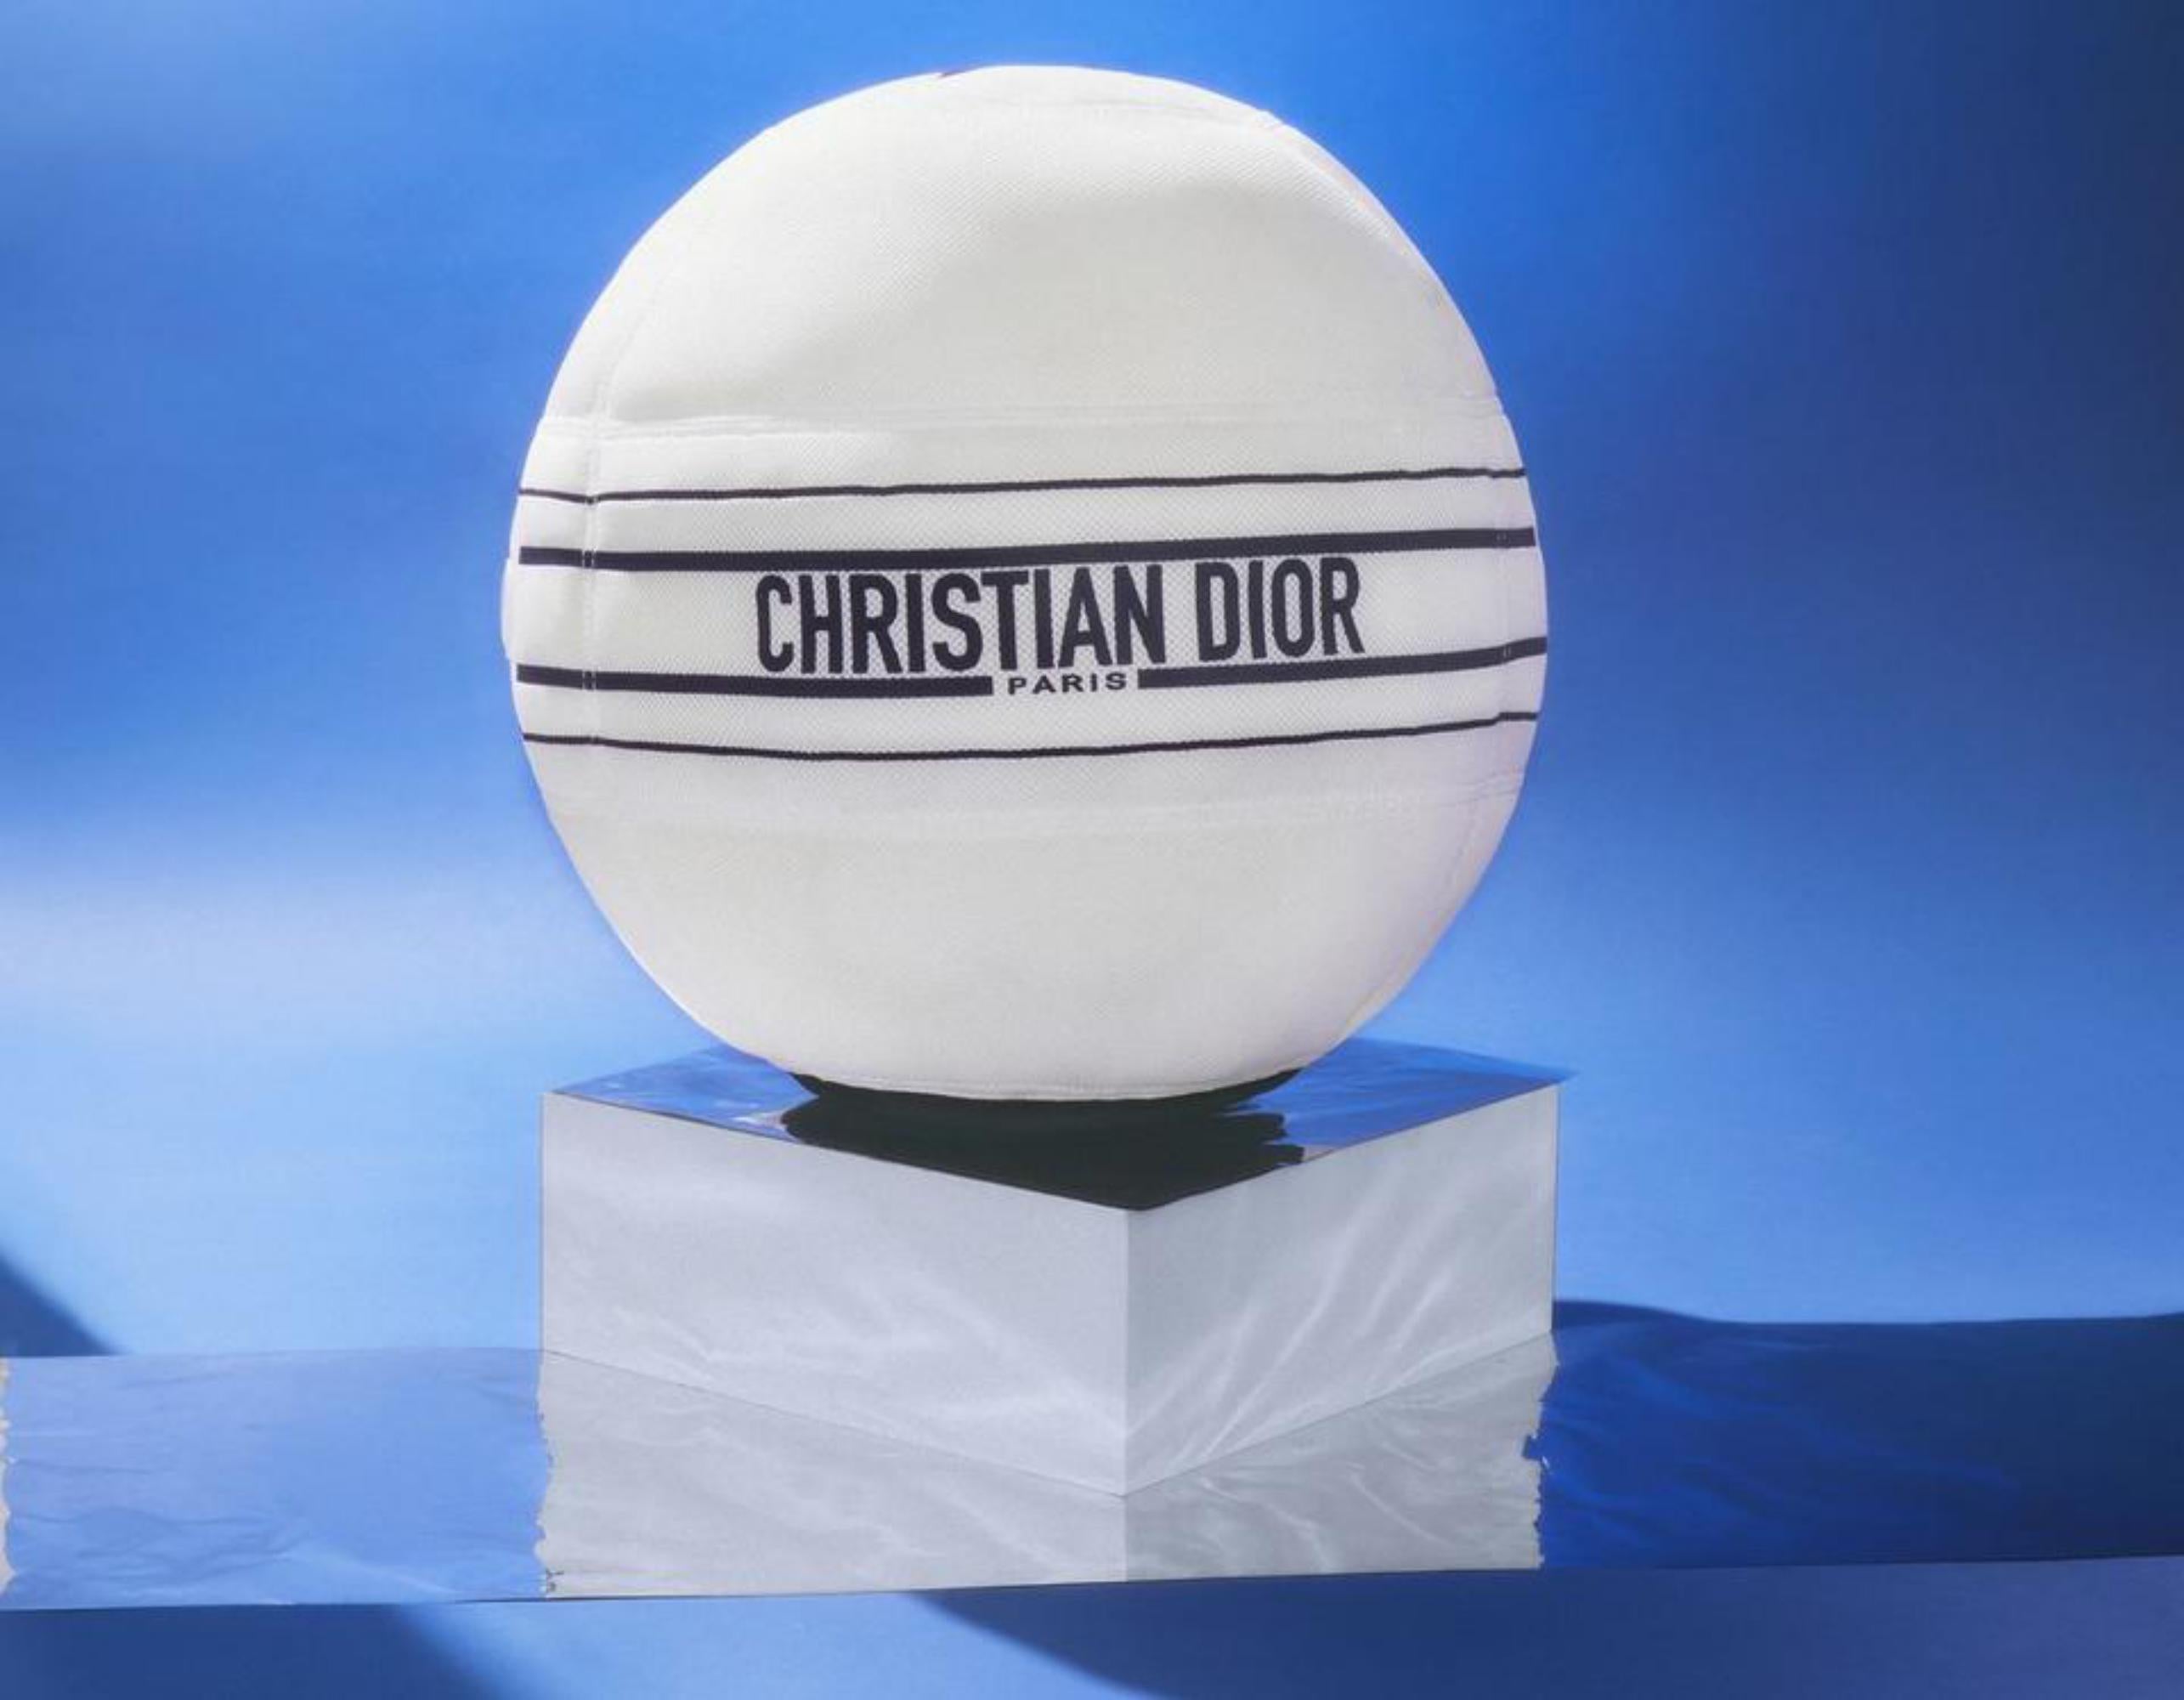 Dior Limited Edition White Logo Technogym Gym Ball for Dior Yoga 128DIOR
BRAND NEW
(10/10 or N)

SIZE & FIT
Diameter: 55 cm / 21.5 inches
Weight limit: 140 kg / 308.5 pounds

Combining wellbeing and elegance, TECHNOGYM BALL FOR DIOR is offered in a